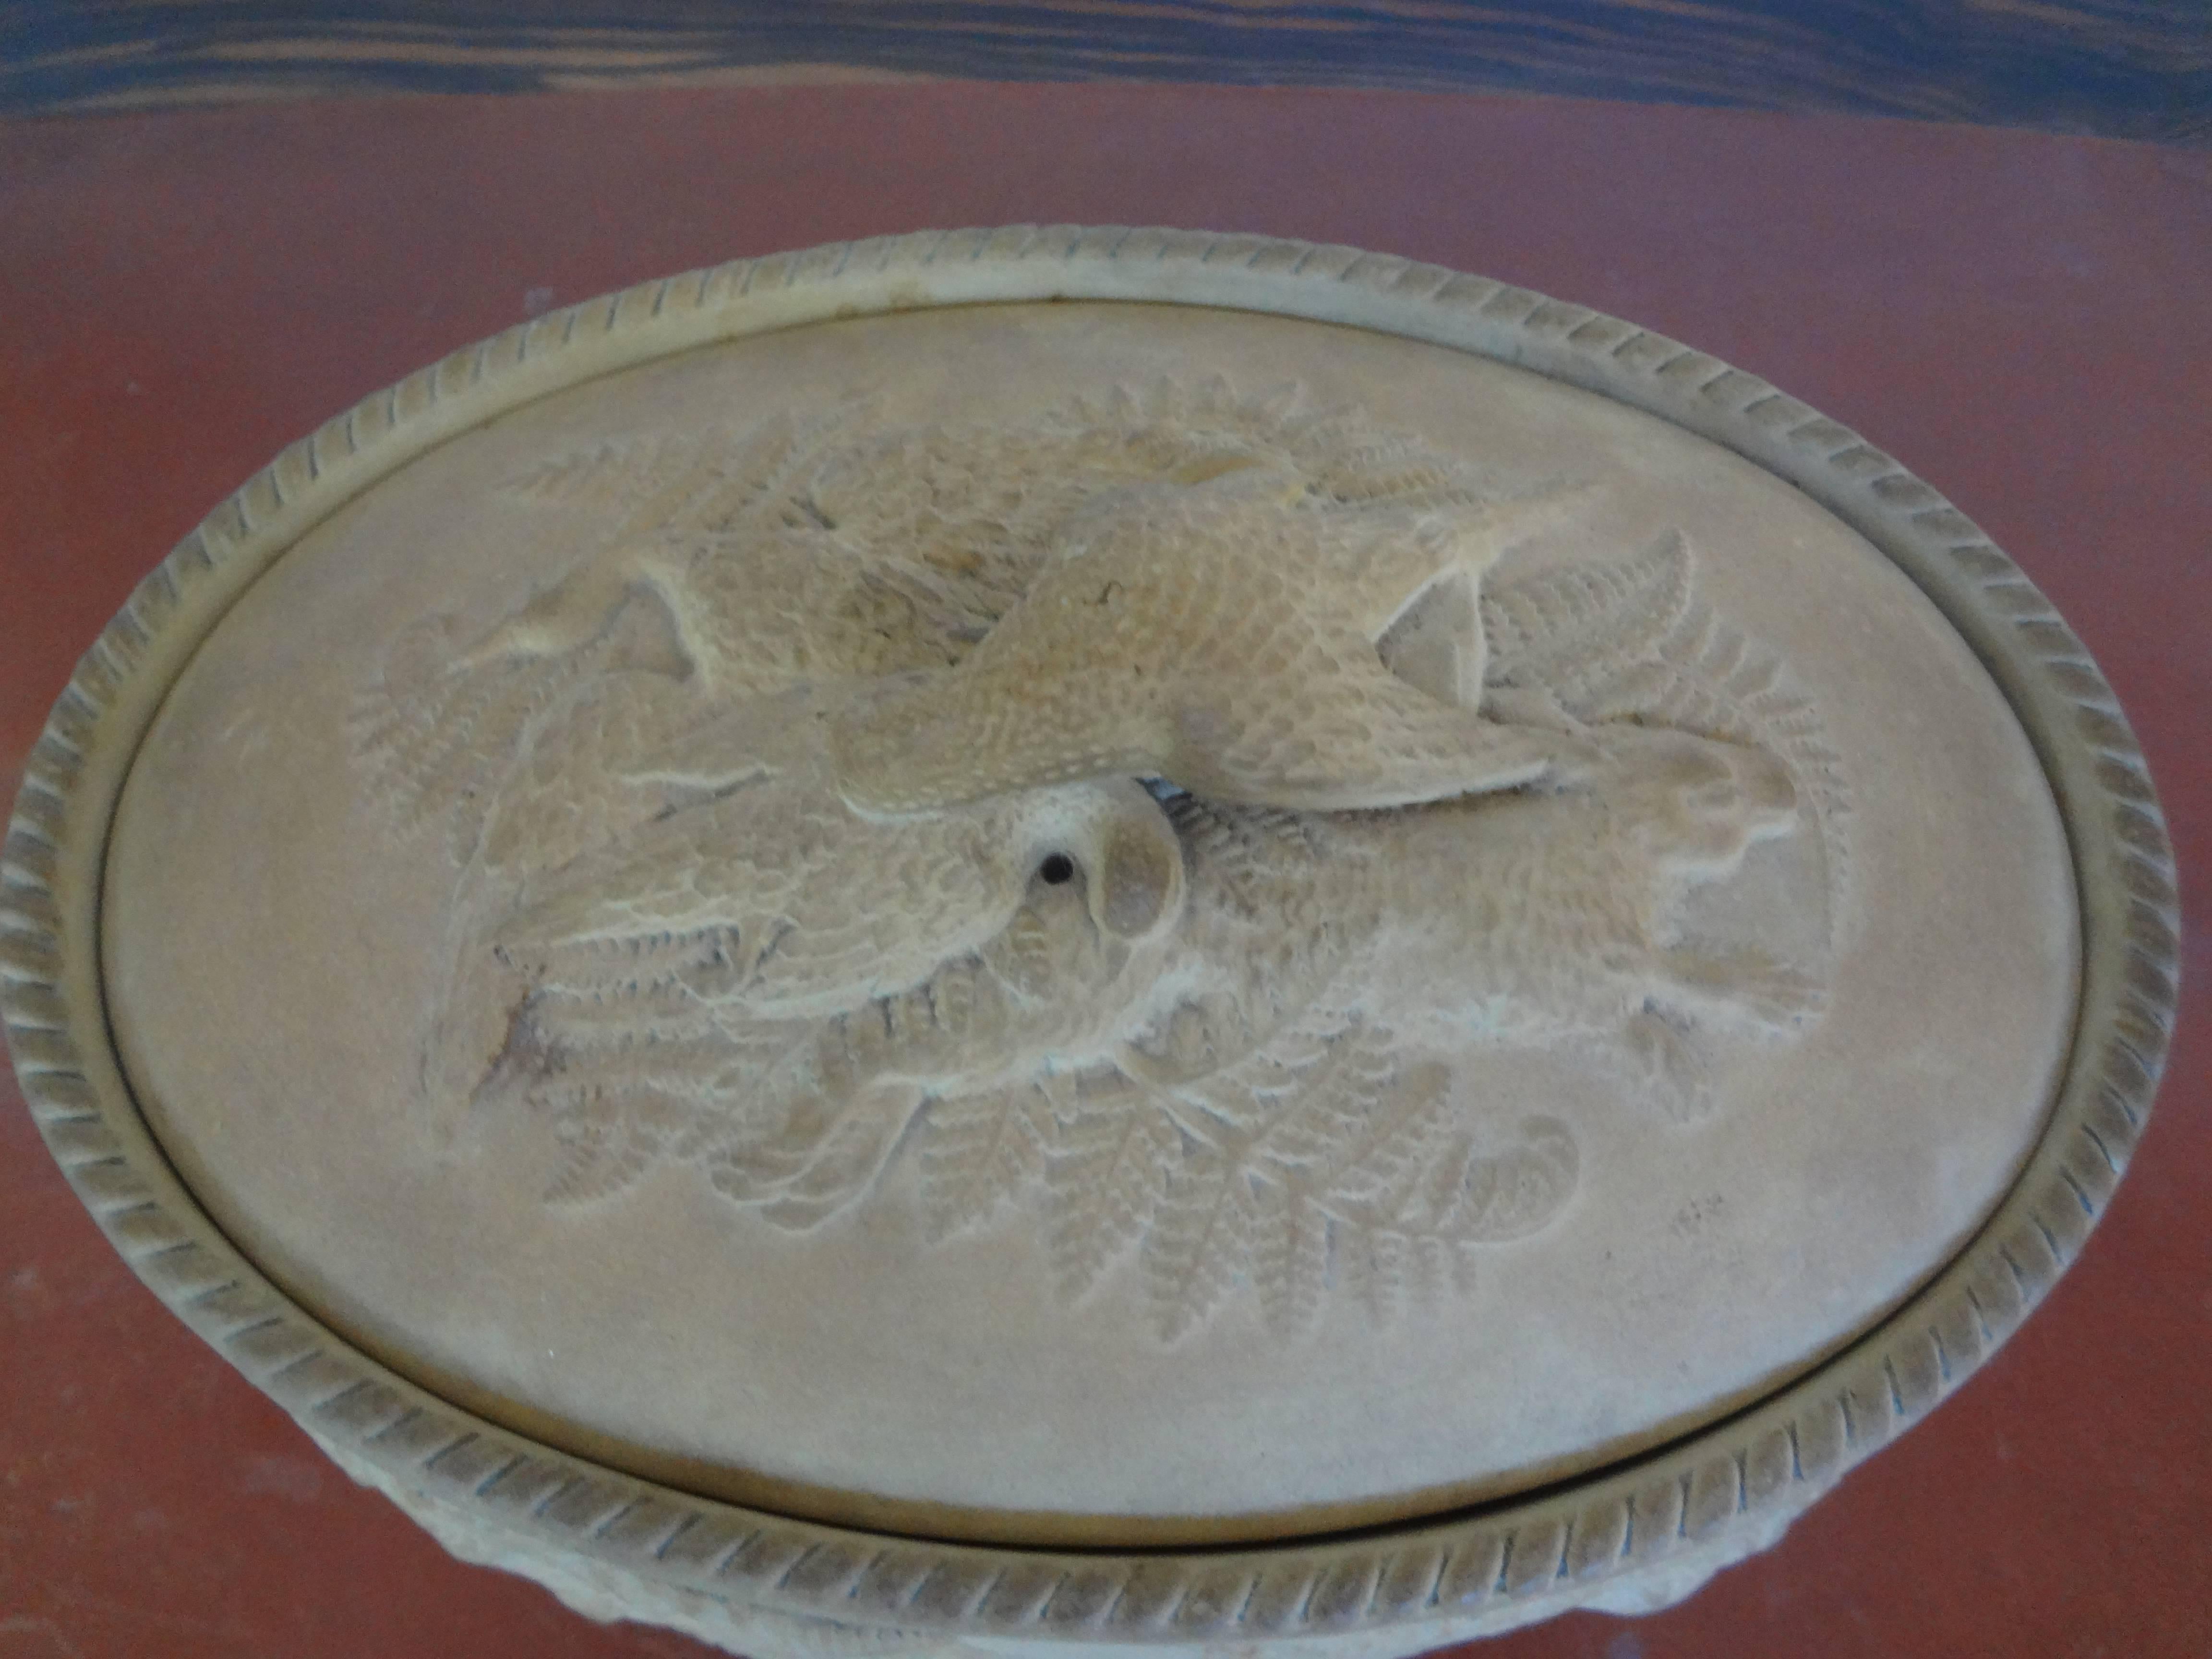 Gorgeous 19th century French Napoleon III caneware game pie dish or tureen with lid and original liner adorned with fowl. Game pie dishes were used in the French countryside as serving pieces for meals prepared using newly caught game.